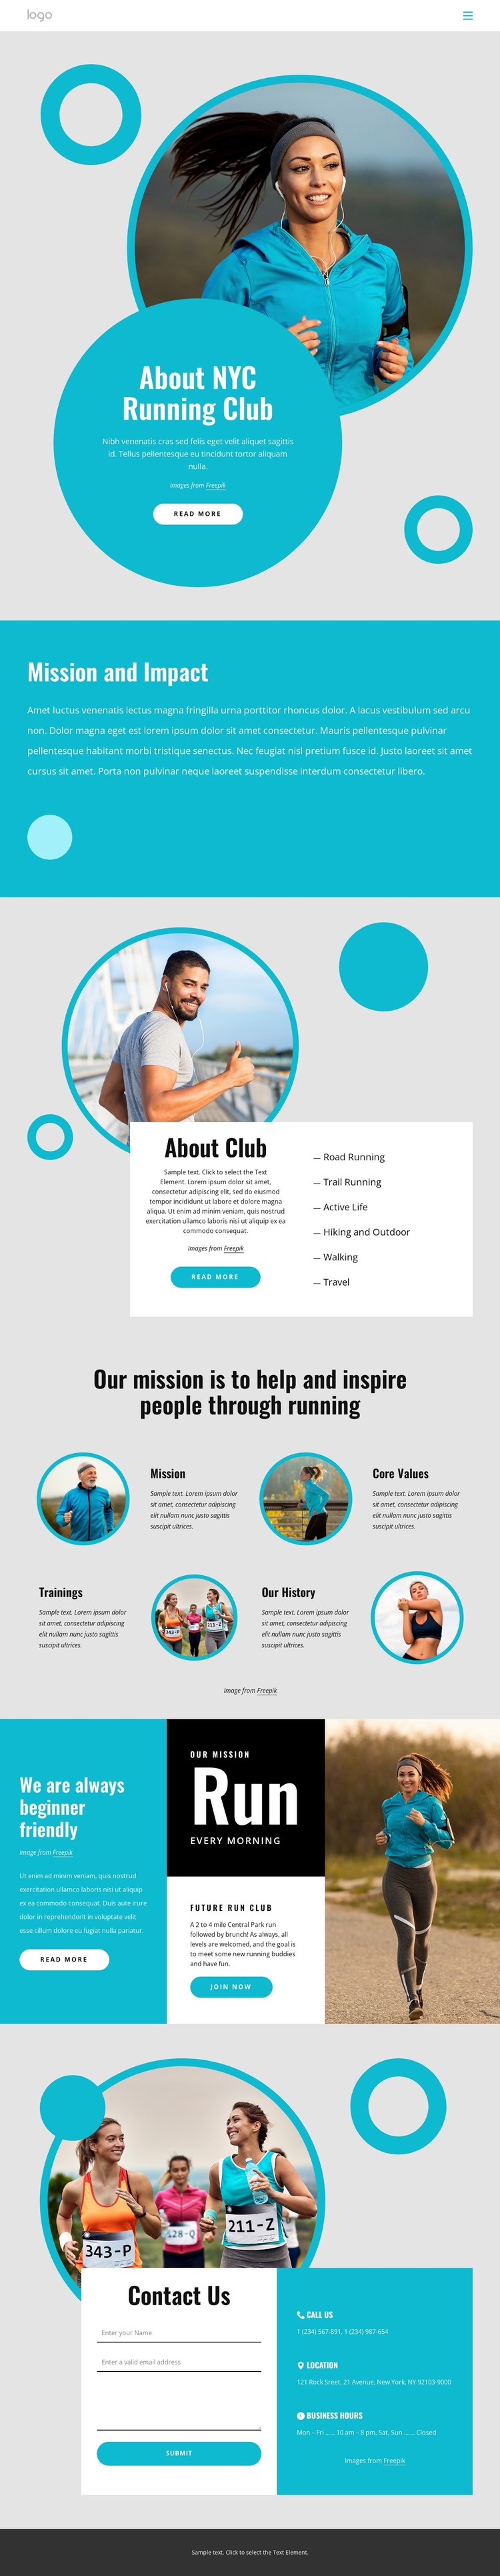 About NYC running club Static Site Generator